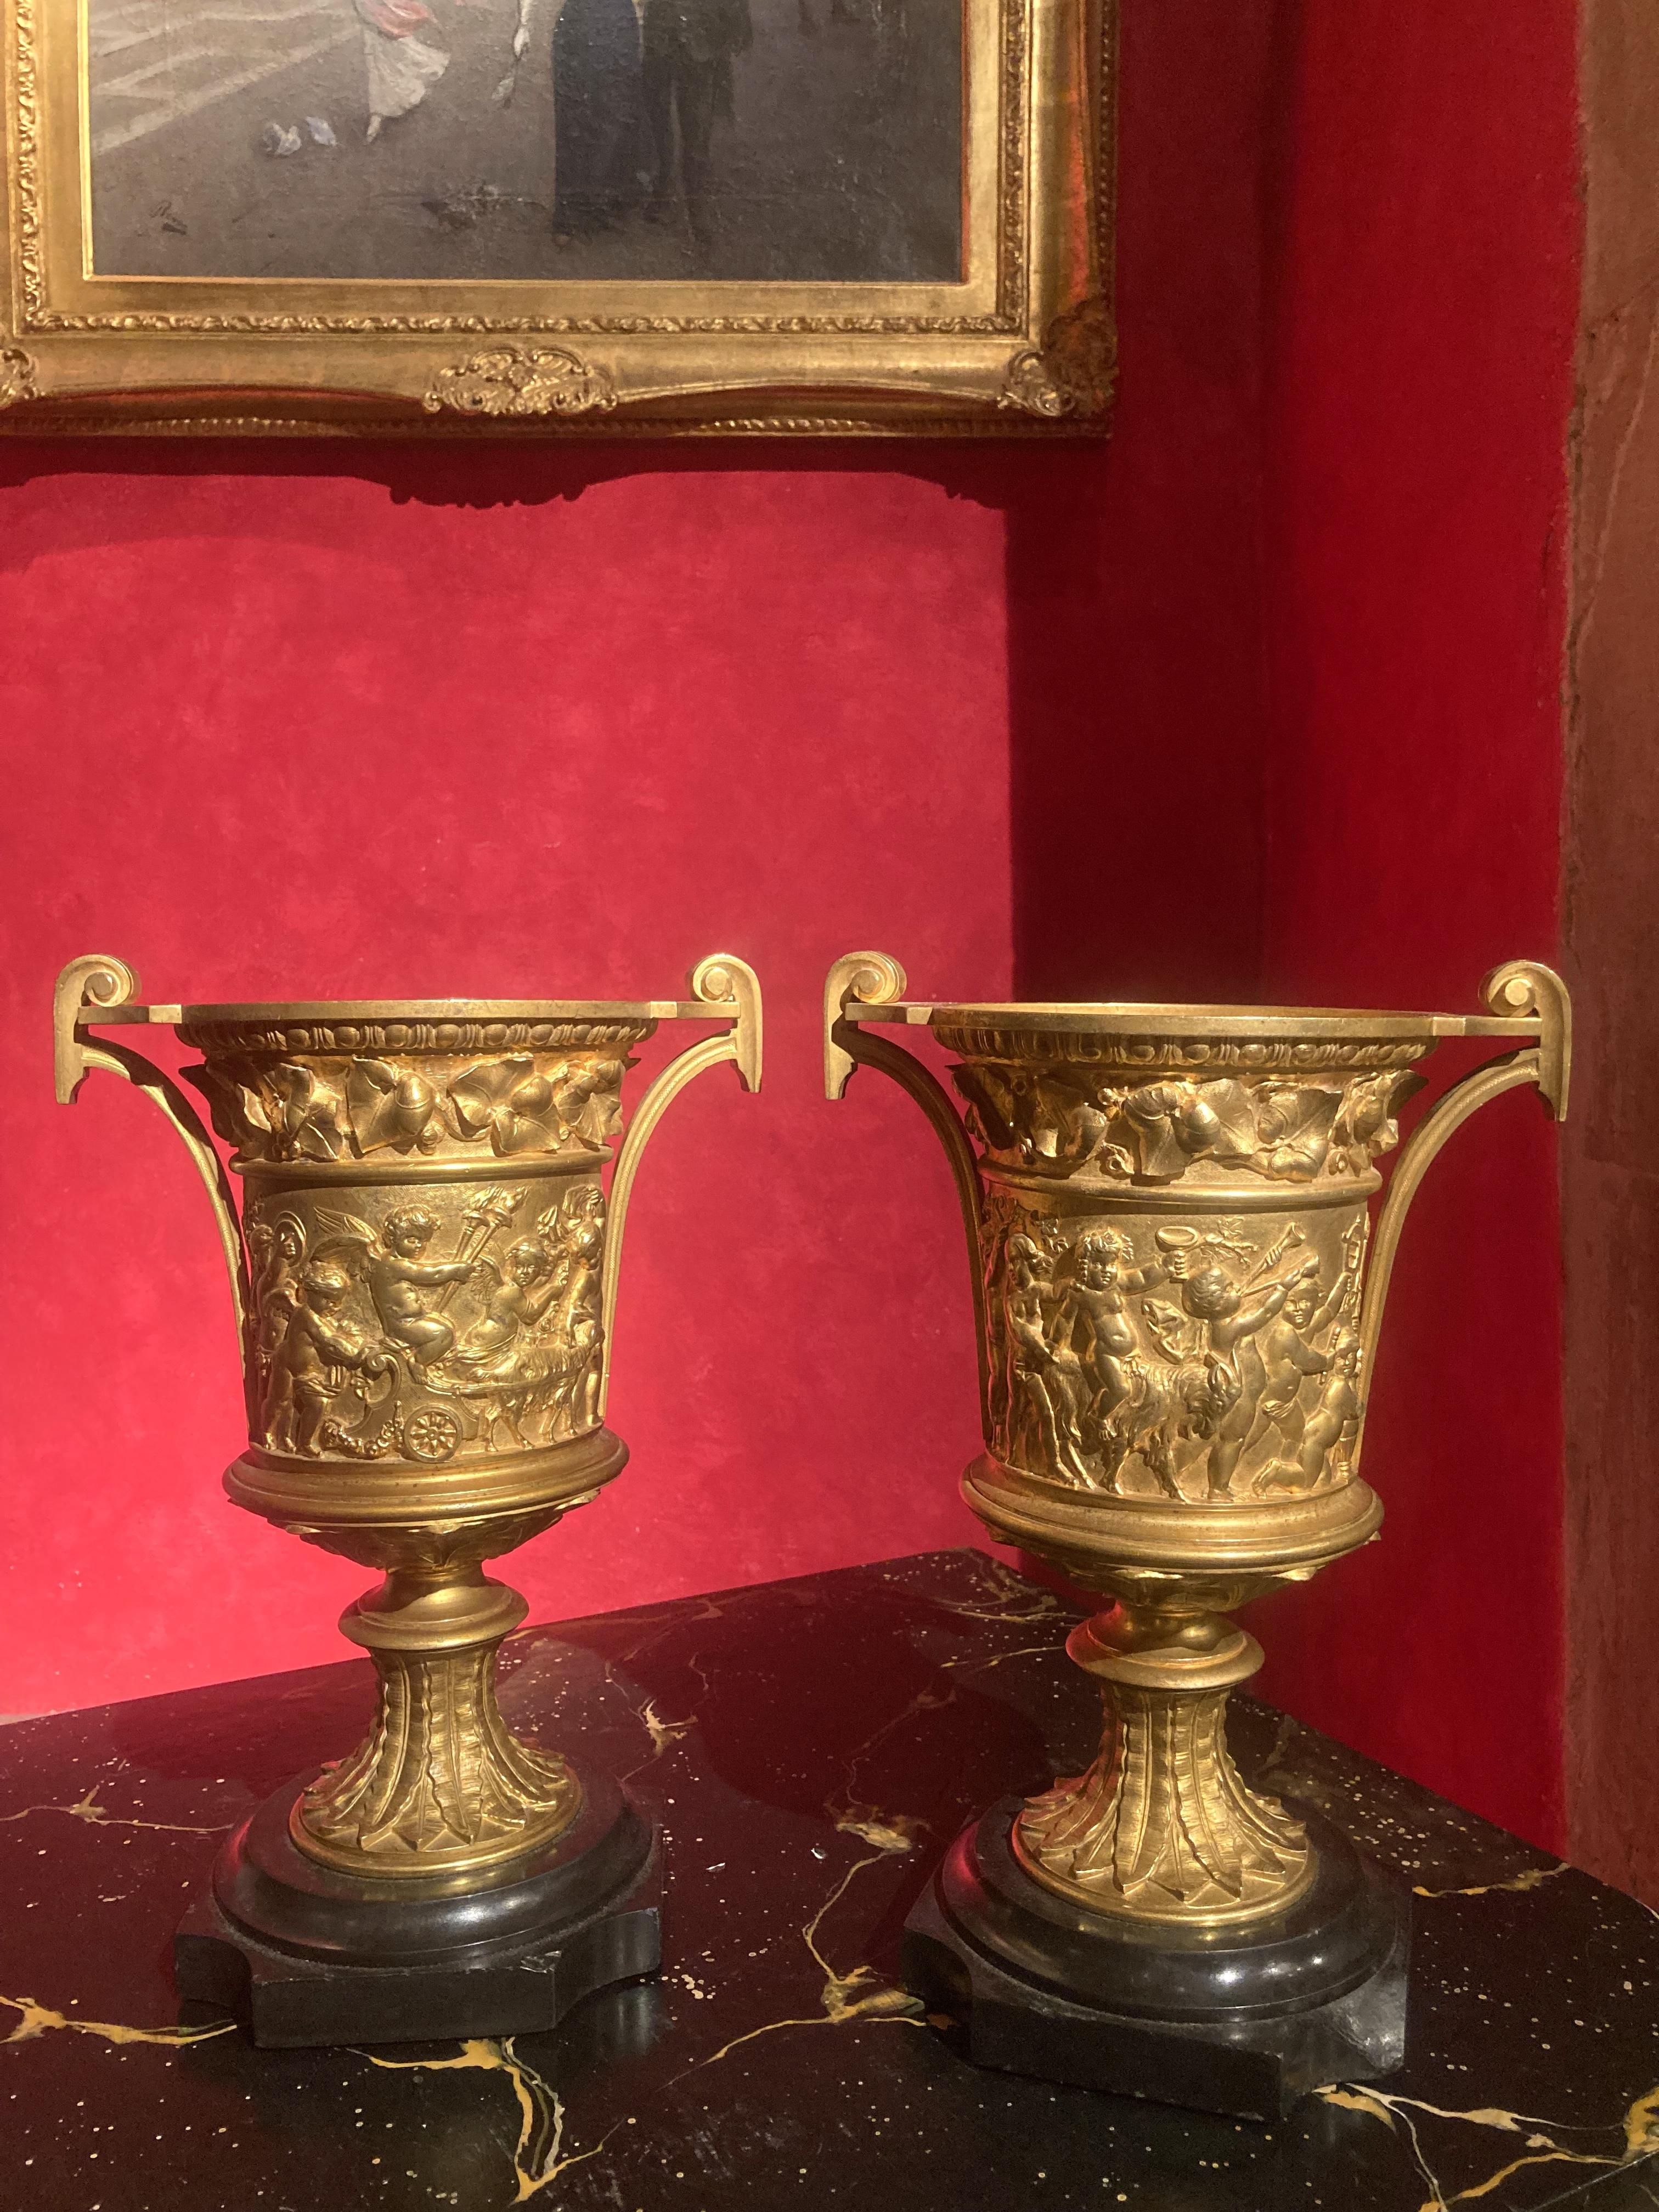 This pair of French Louis XVI ormolu handled vases date back to late 18th century (1700s) These exceptional camapana urn shaped gilt bronze vases were created with the ancient traditional technique of the lost-wax casting (à la cire perdue) and